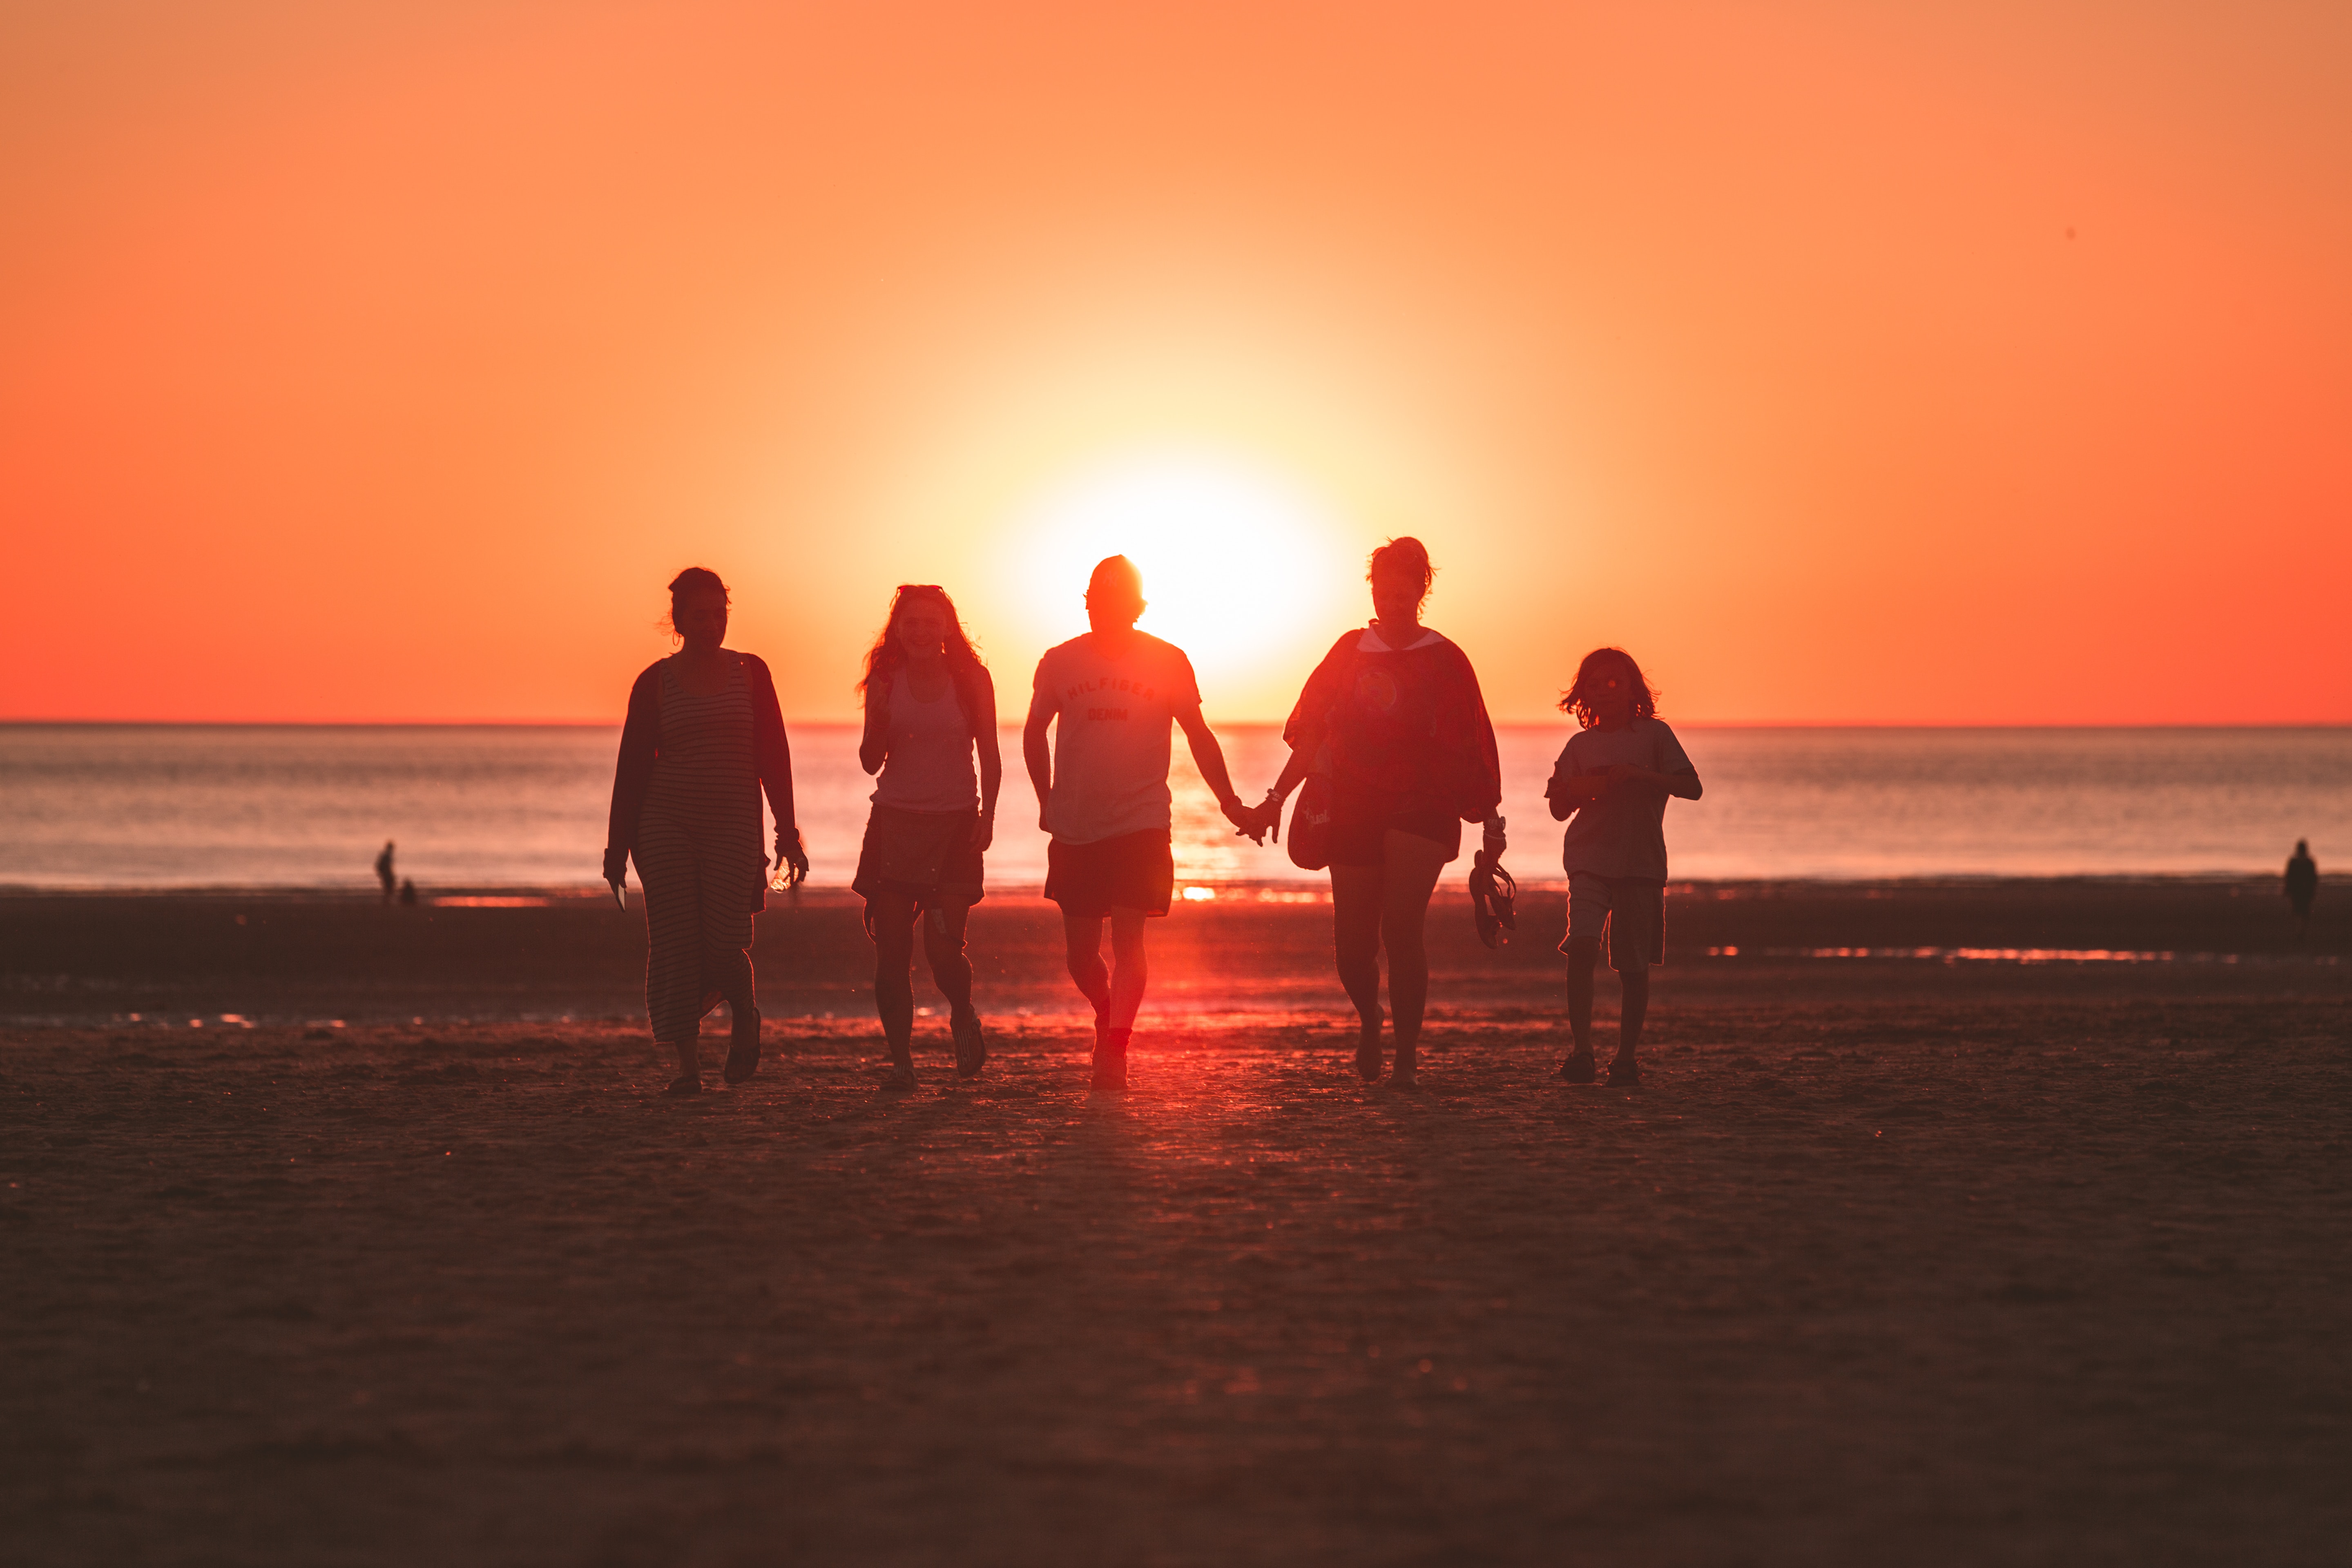 Silhouette photo of five people walking on the beach during sunset.